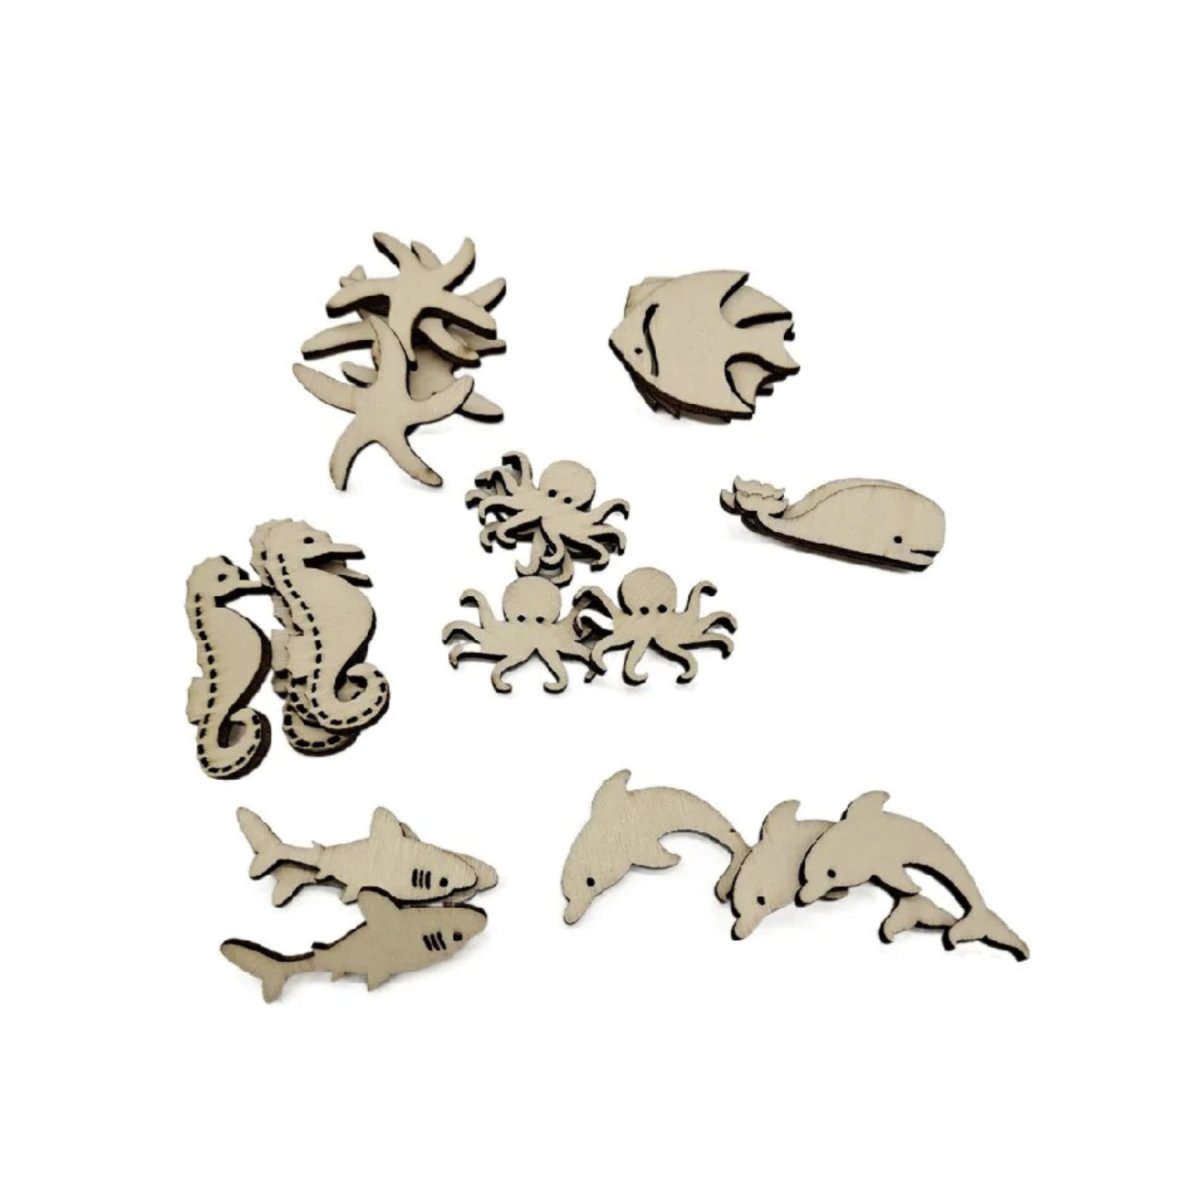 20pcs Wooden Animal Shapes Dolphin Whale Octopus Fish Starfish Shark Sea Animals Wooden DIY Craft Wood Scrapbooking - - Asia Sell